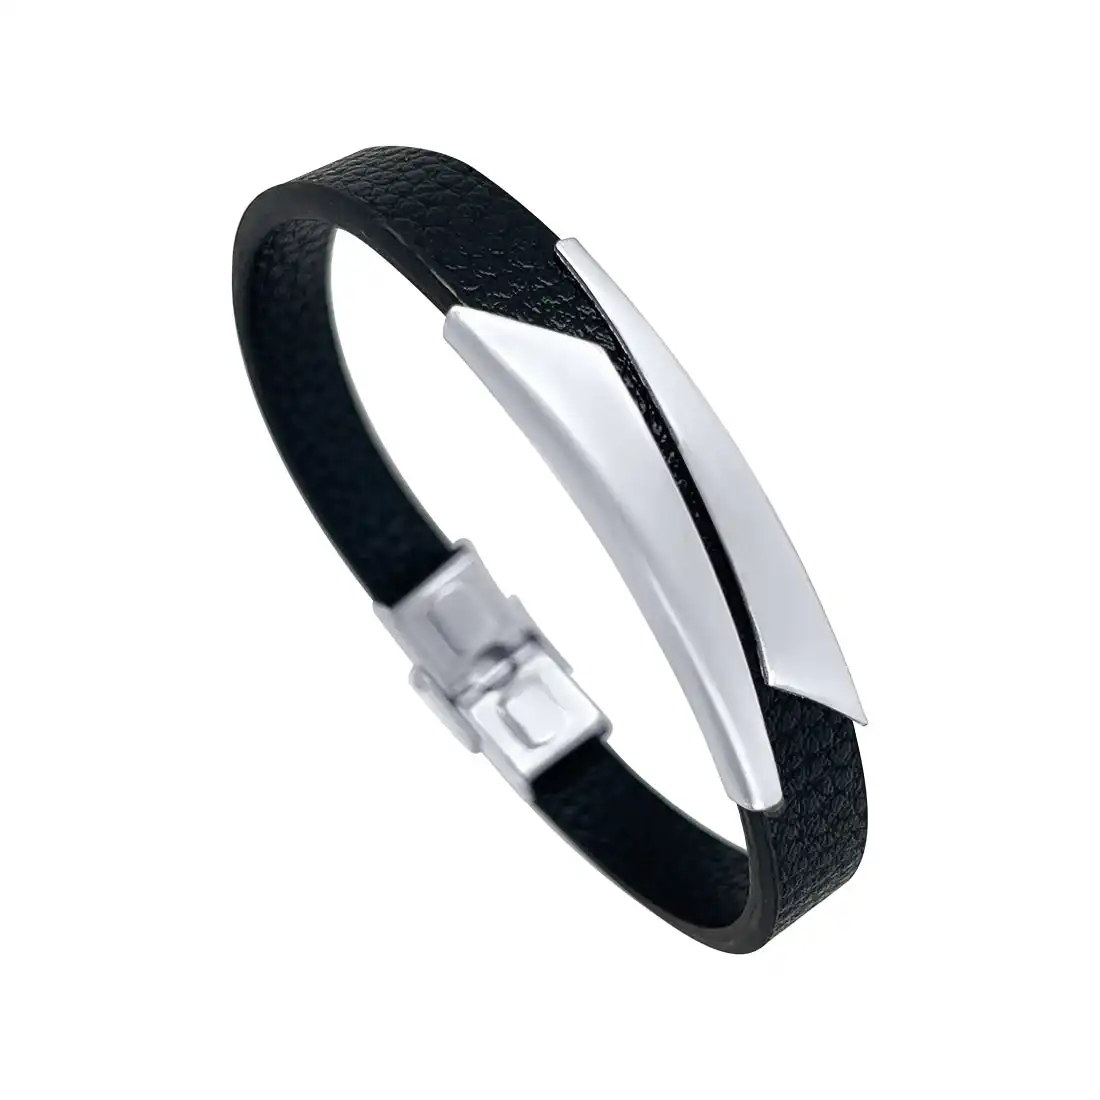 20.5cm Men's Stainless Steel Black Leather Bracelet with Plate